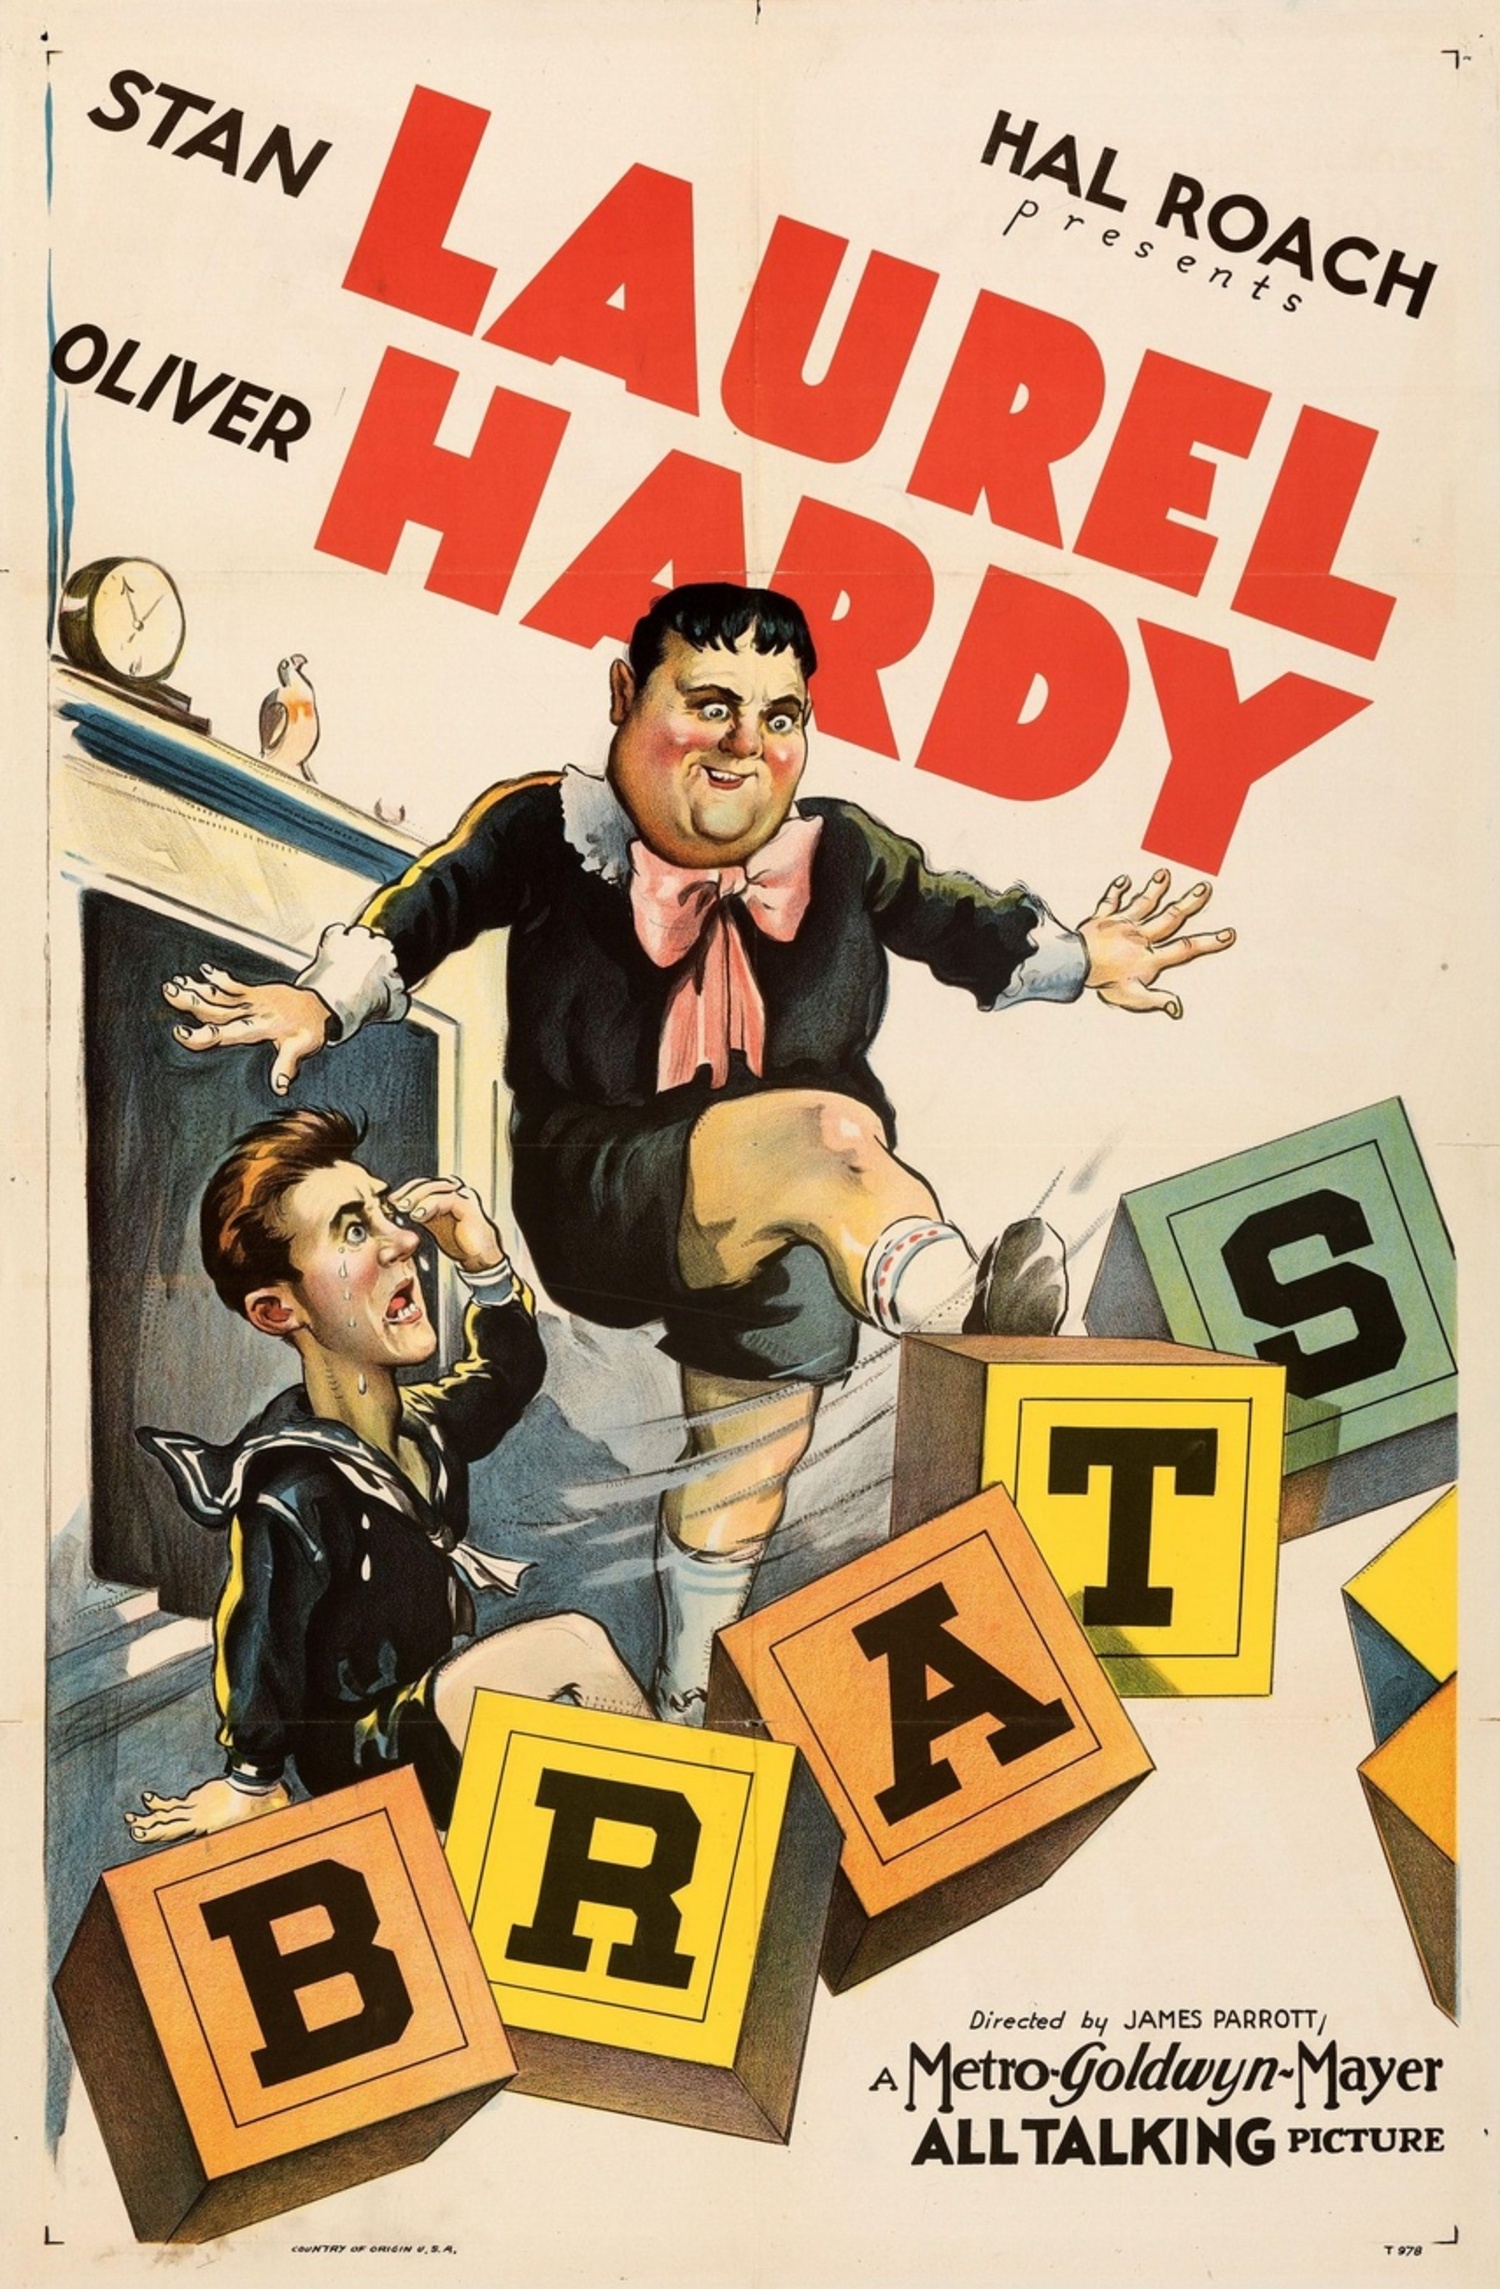 Poster for the 1930 Laurel and Hardy film “Brats” (directed by James Parrott).